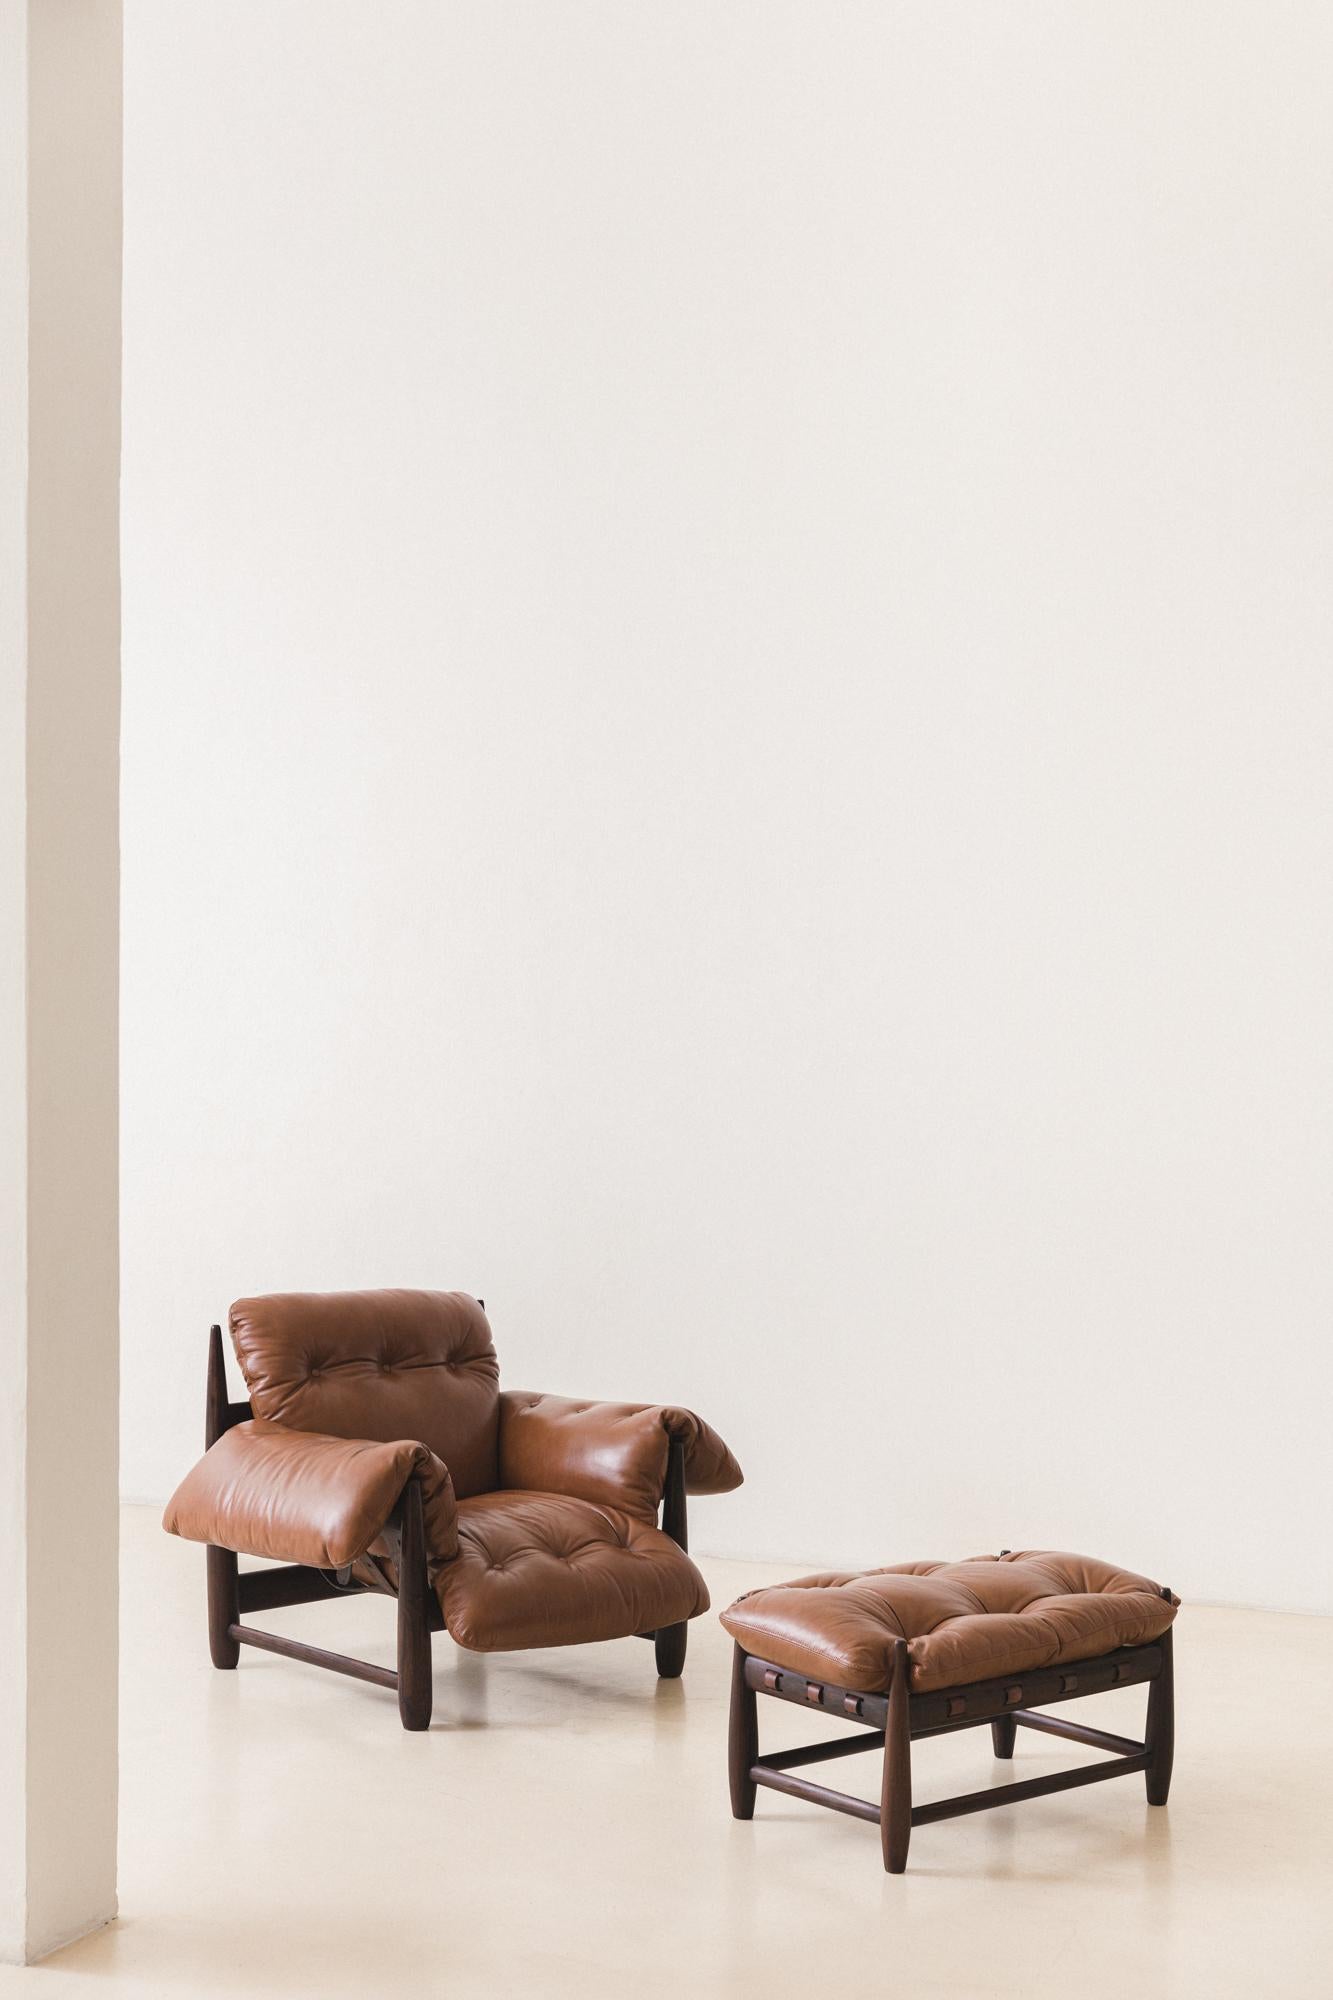 Brazilian Vintage 'Mole' Rosewood Armchair with Ottoman by Sergio Rodrigues, 1957, Brazil